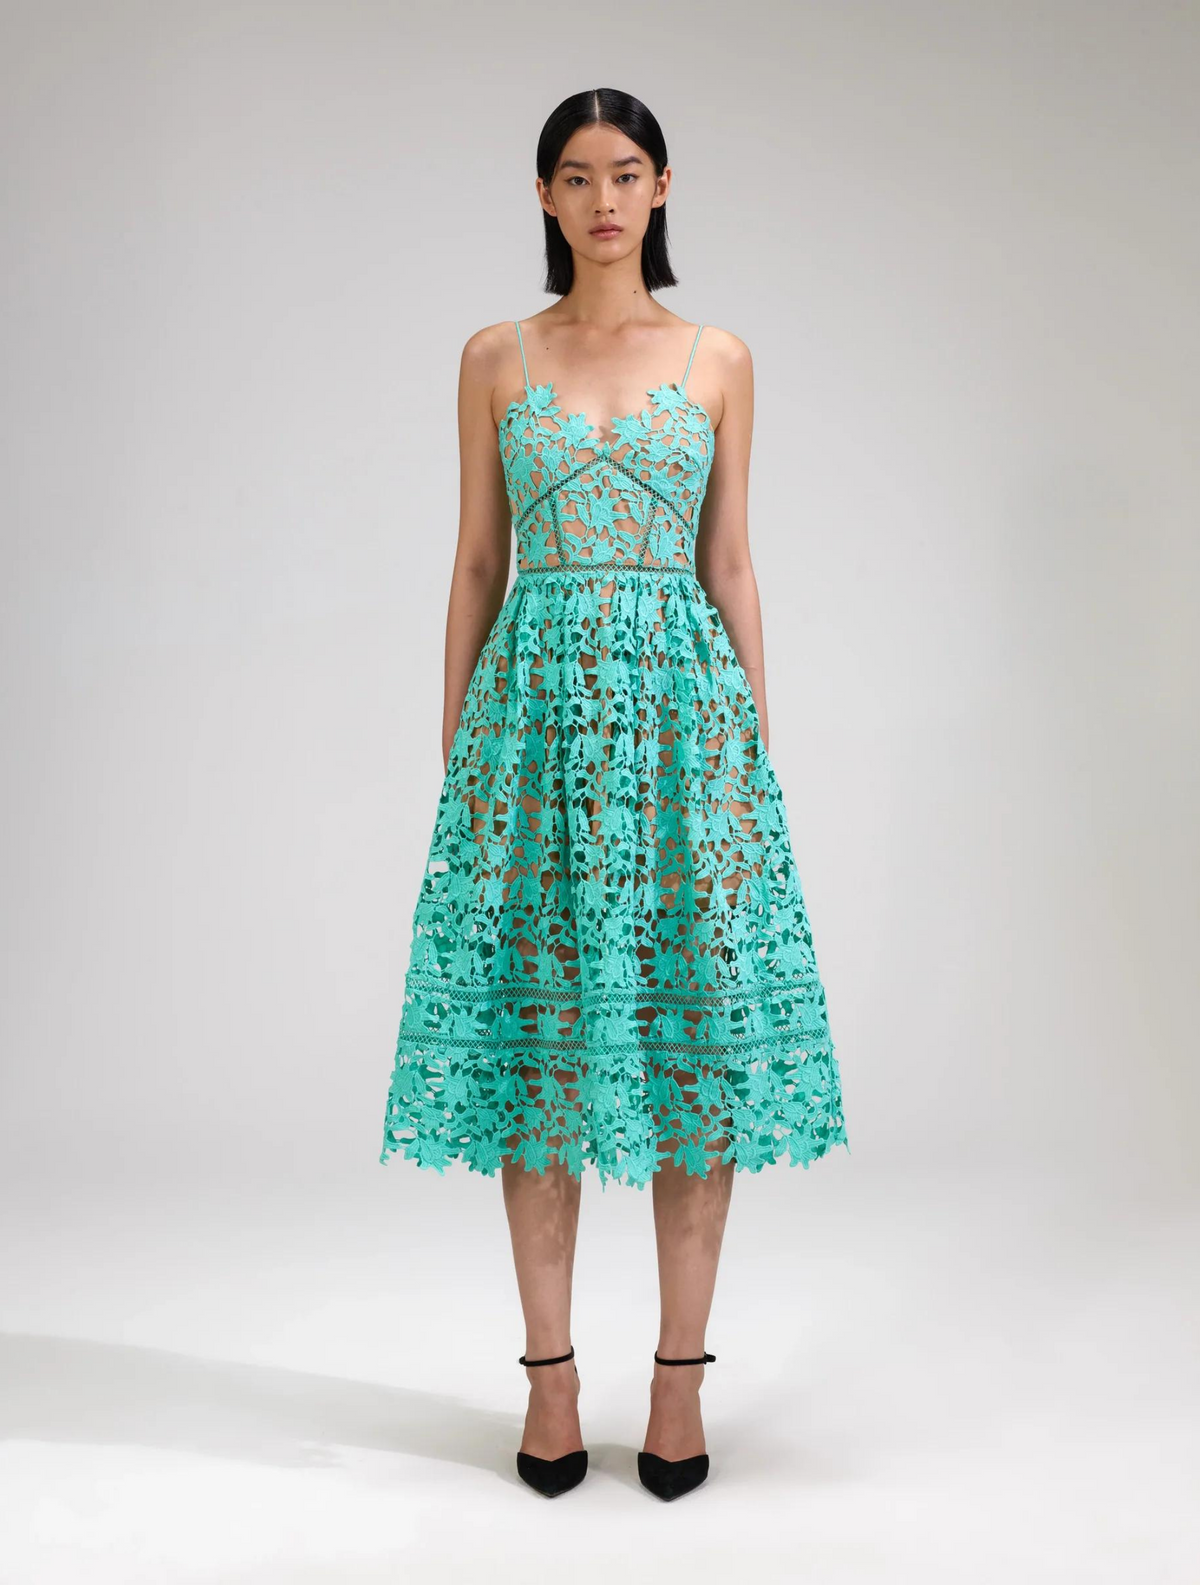 Aqua lace strappy dress with caramel visible lining